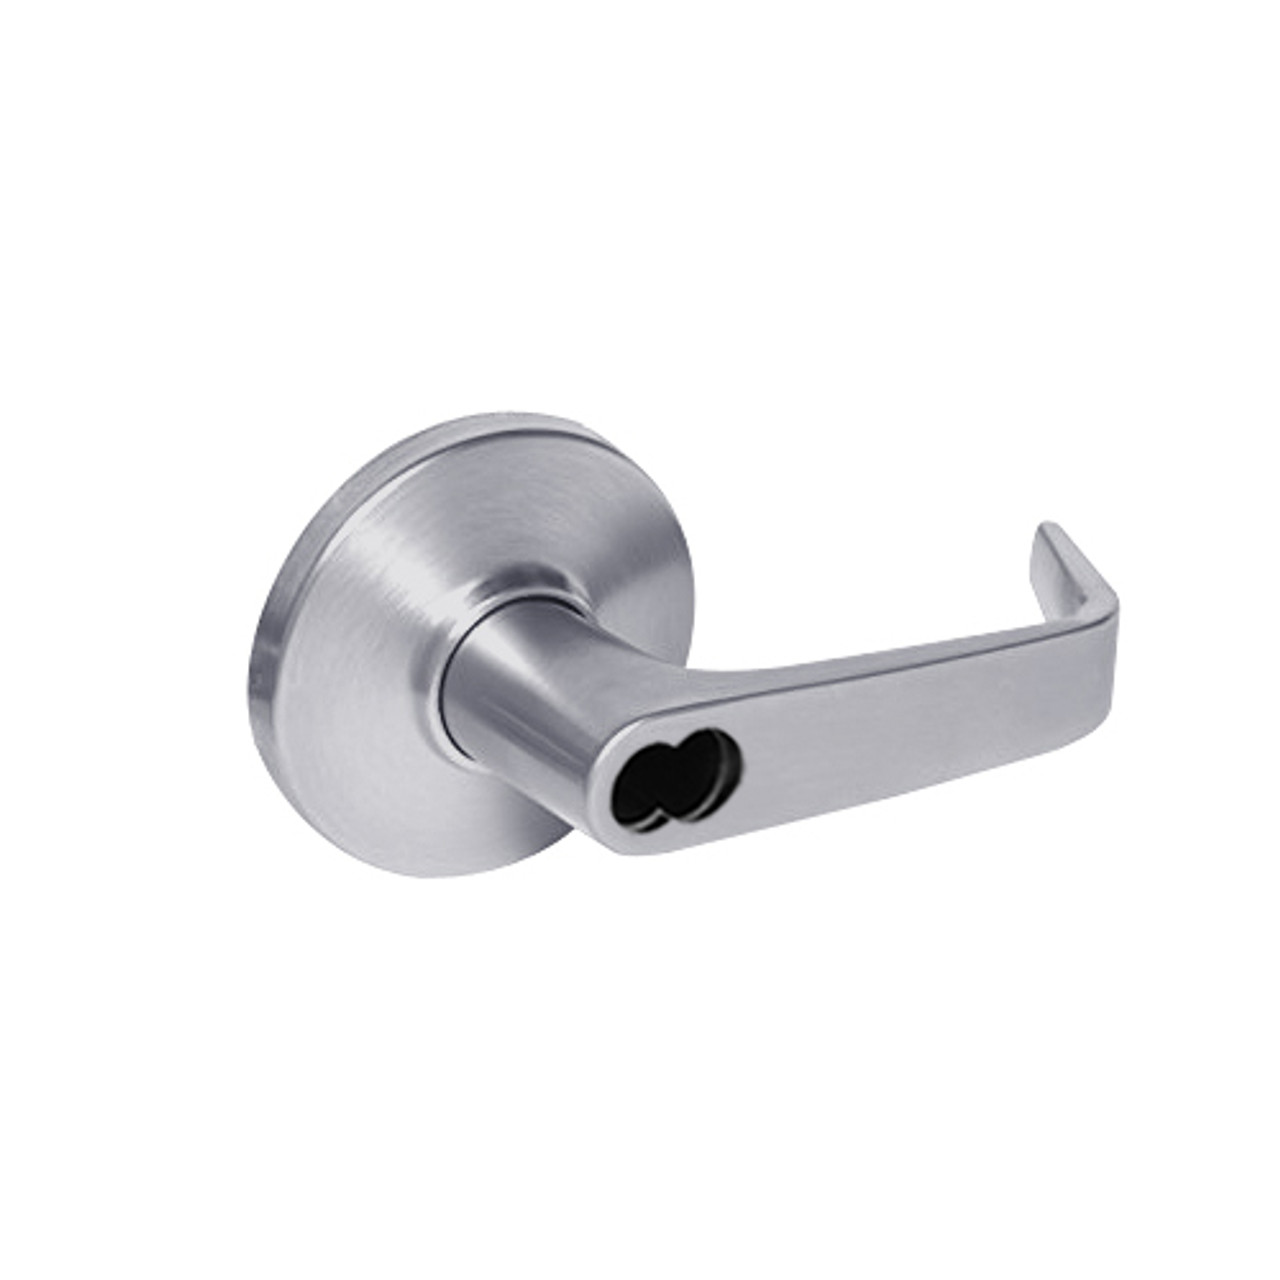 9K37XD15DS3626 Best 9K Series Special Function Cylindrical Lever Locks with Contour Angle with Return Lever Design Accept 7 Pin Best Core in Satin Chrome